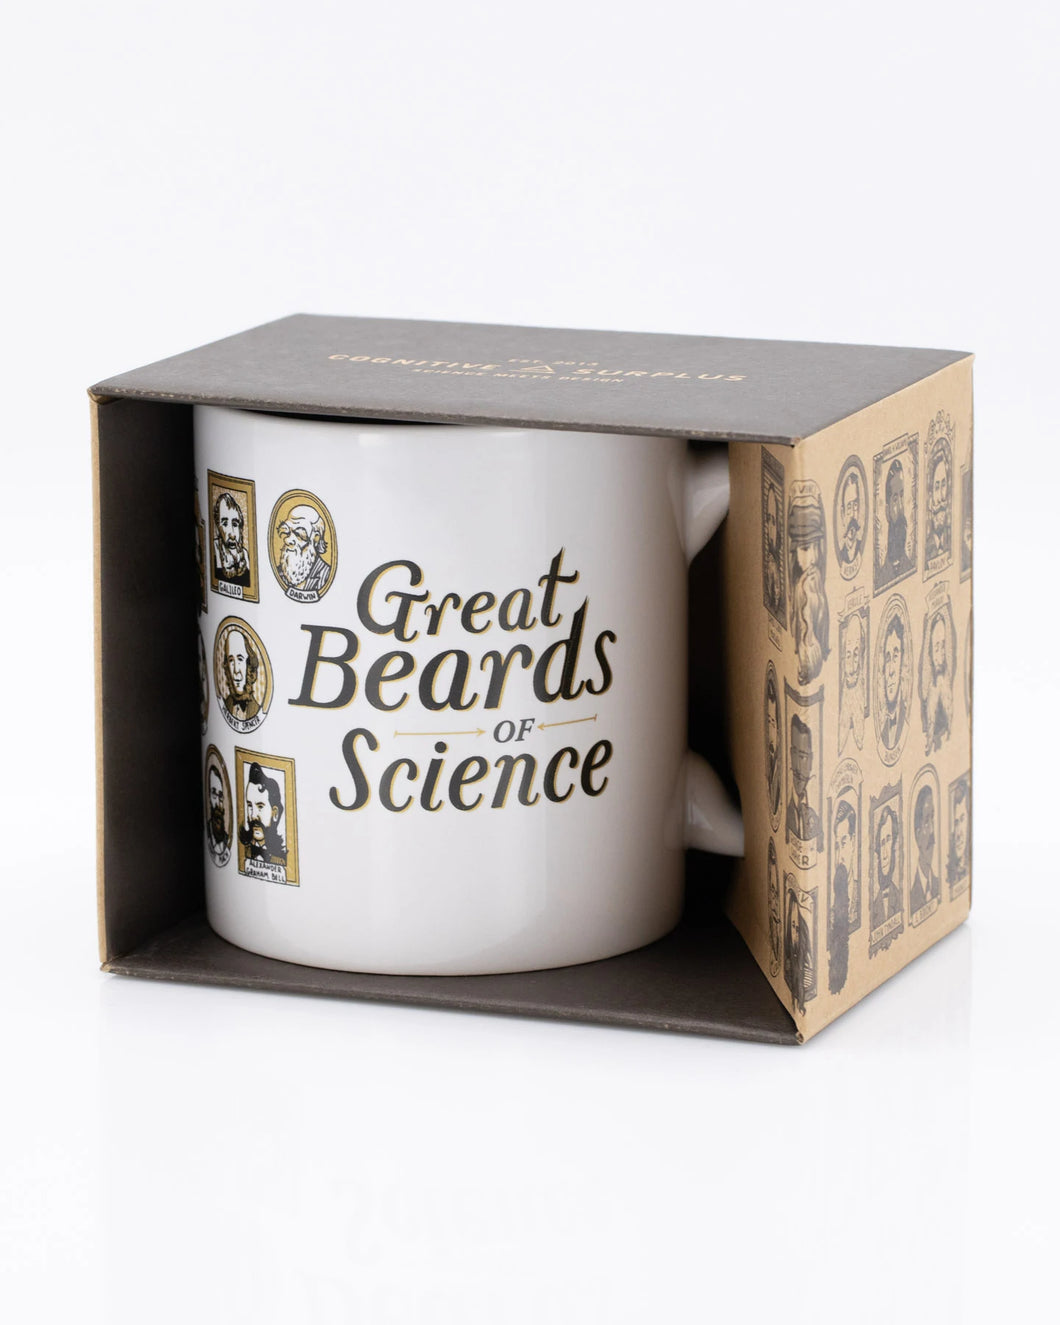    For days when a regular-sized cup of coffee just isn't going to cut it, turn to a Mega Mug to fuel your brightest ideas. Here's a huge 20 ounce mug to celebrate some of science's greatest facial hair, from Darwin to Galileo! 